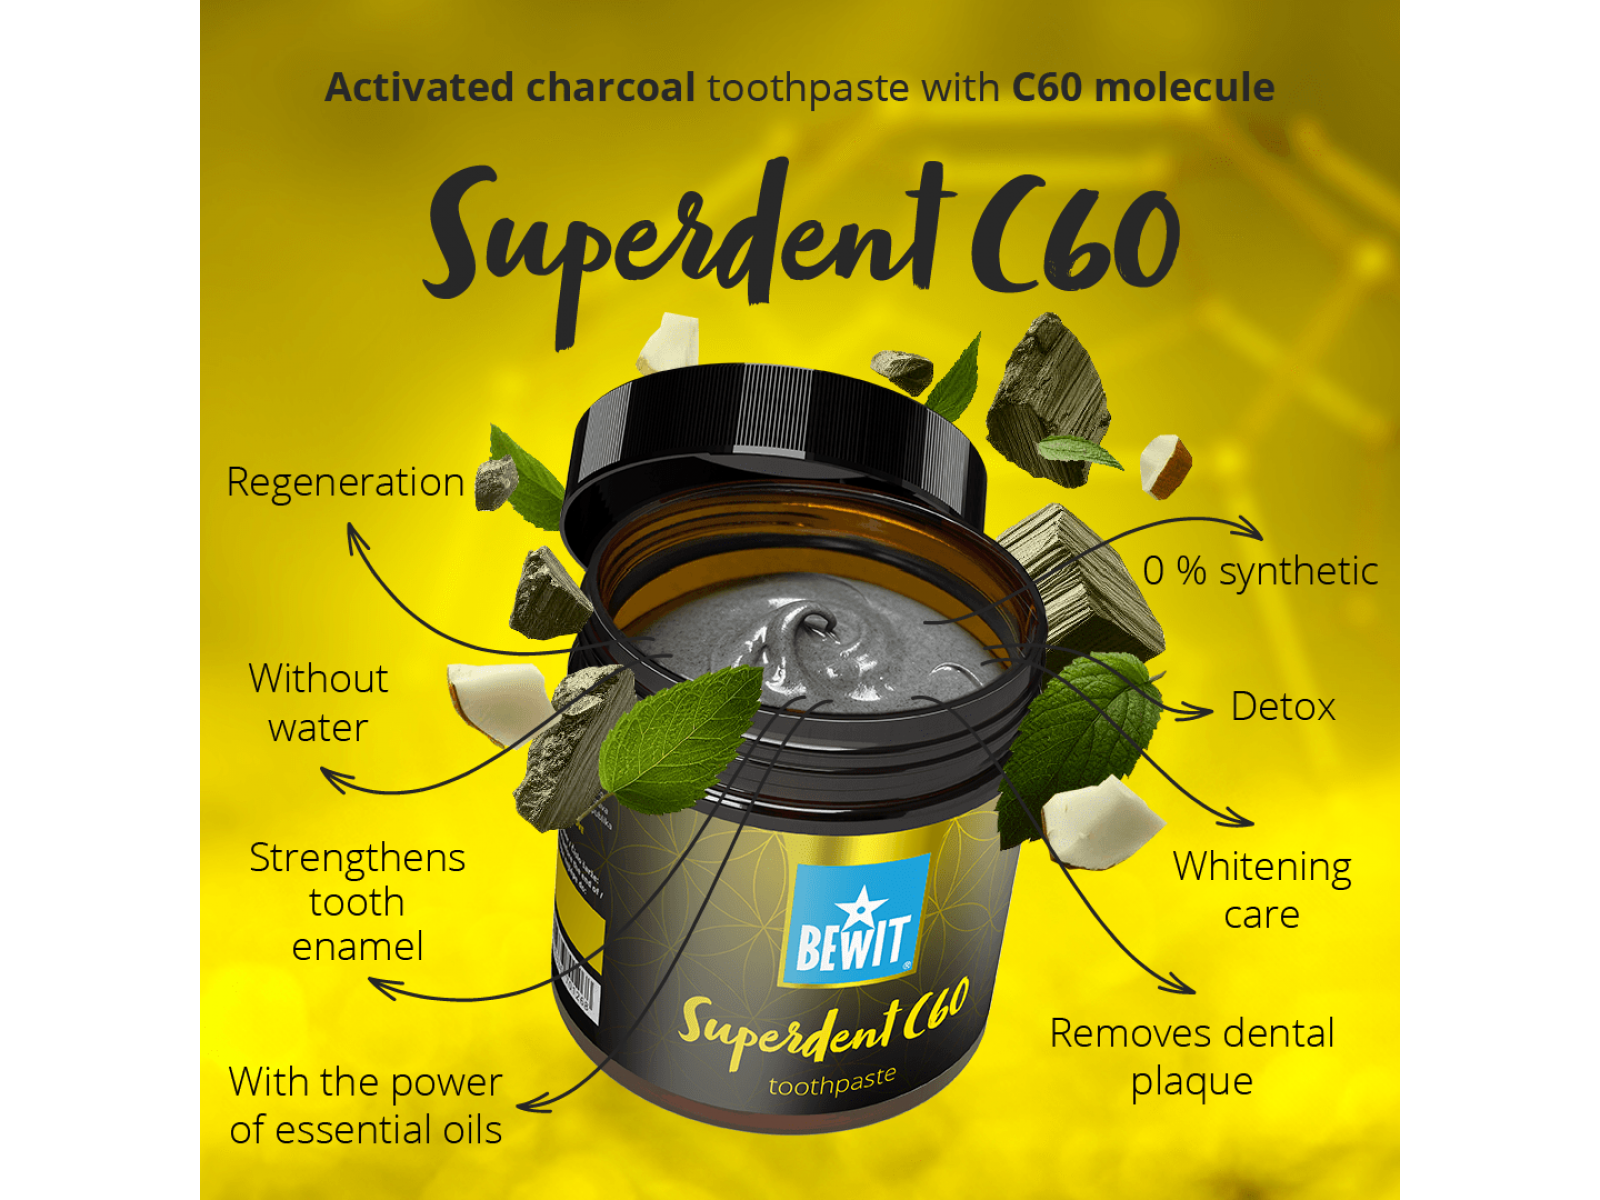 BEWIT Superdent C60 - Toothpaste containing activated carbon and C60 molecule - 6